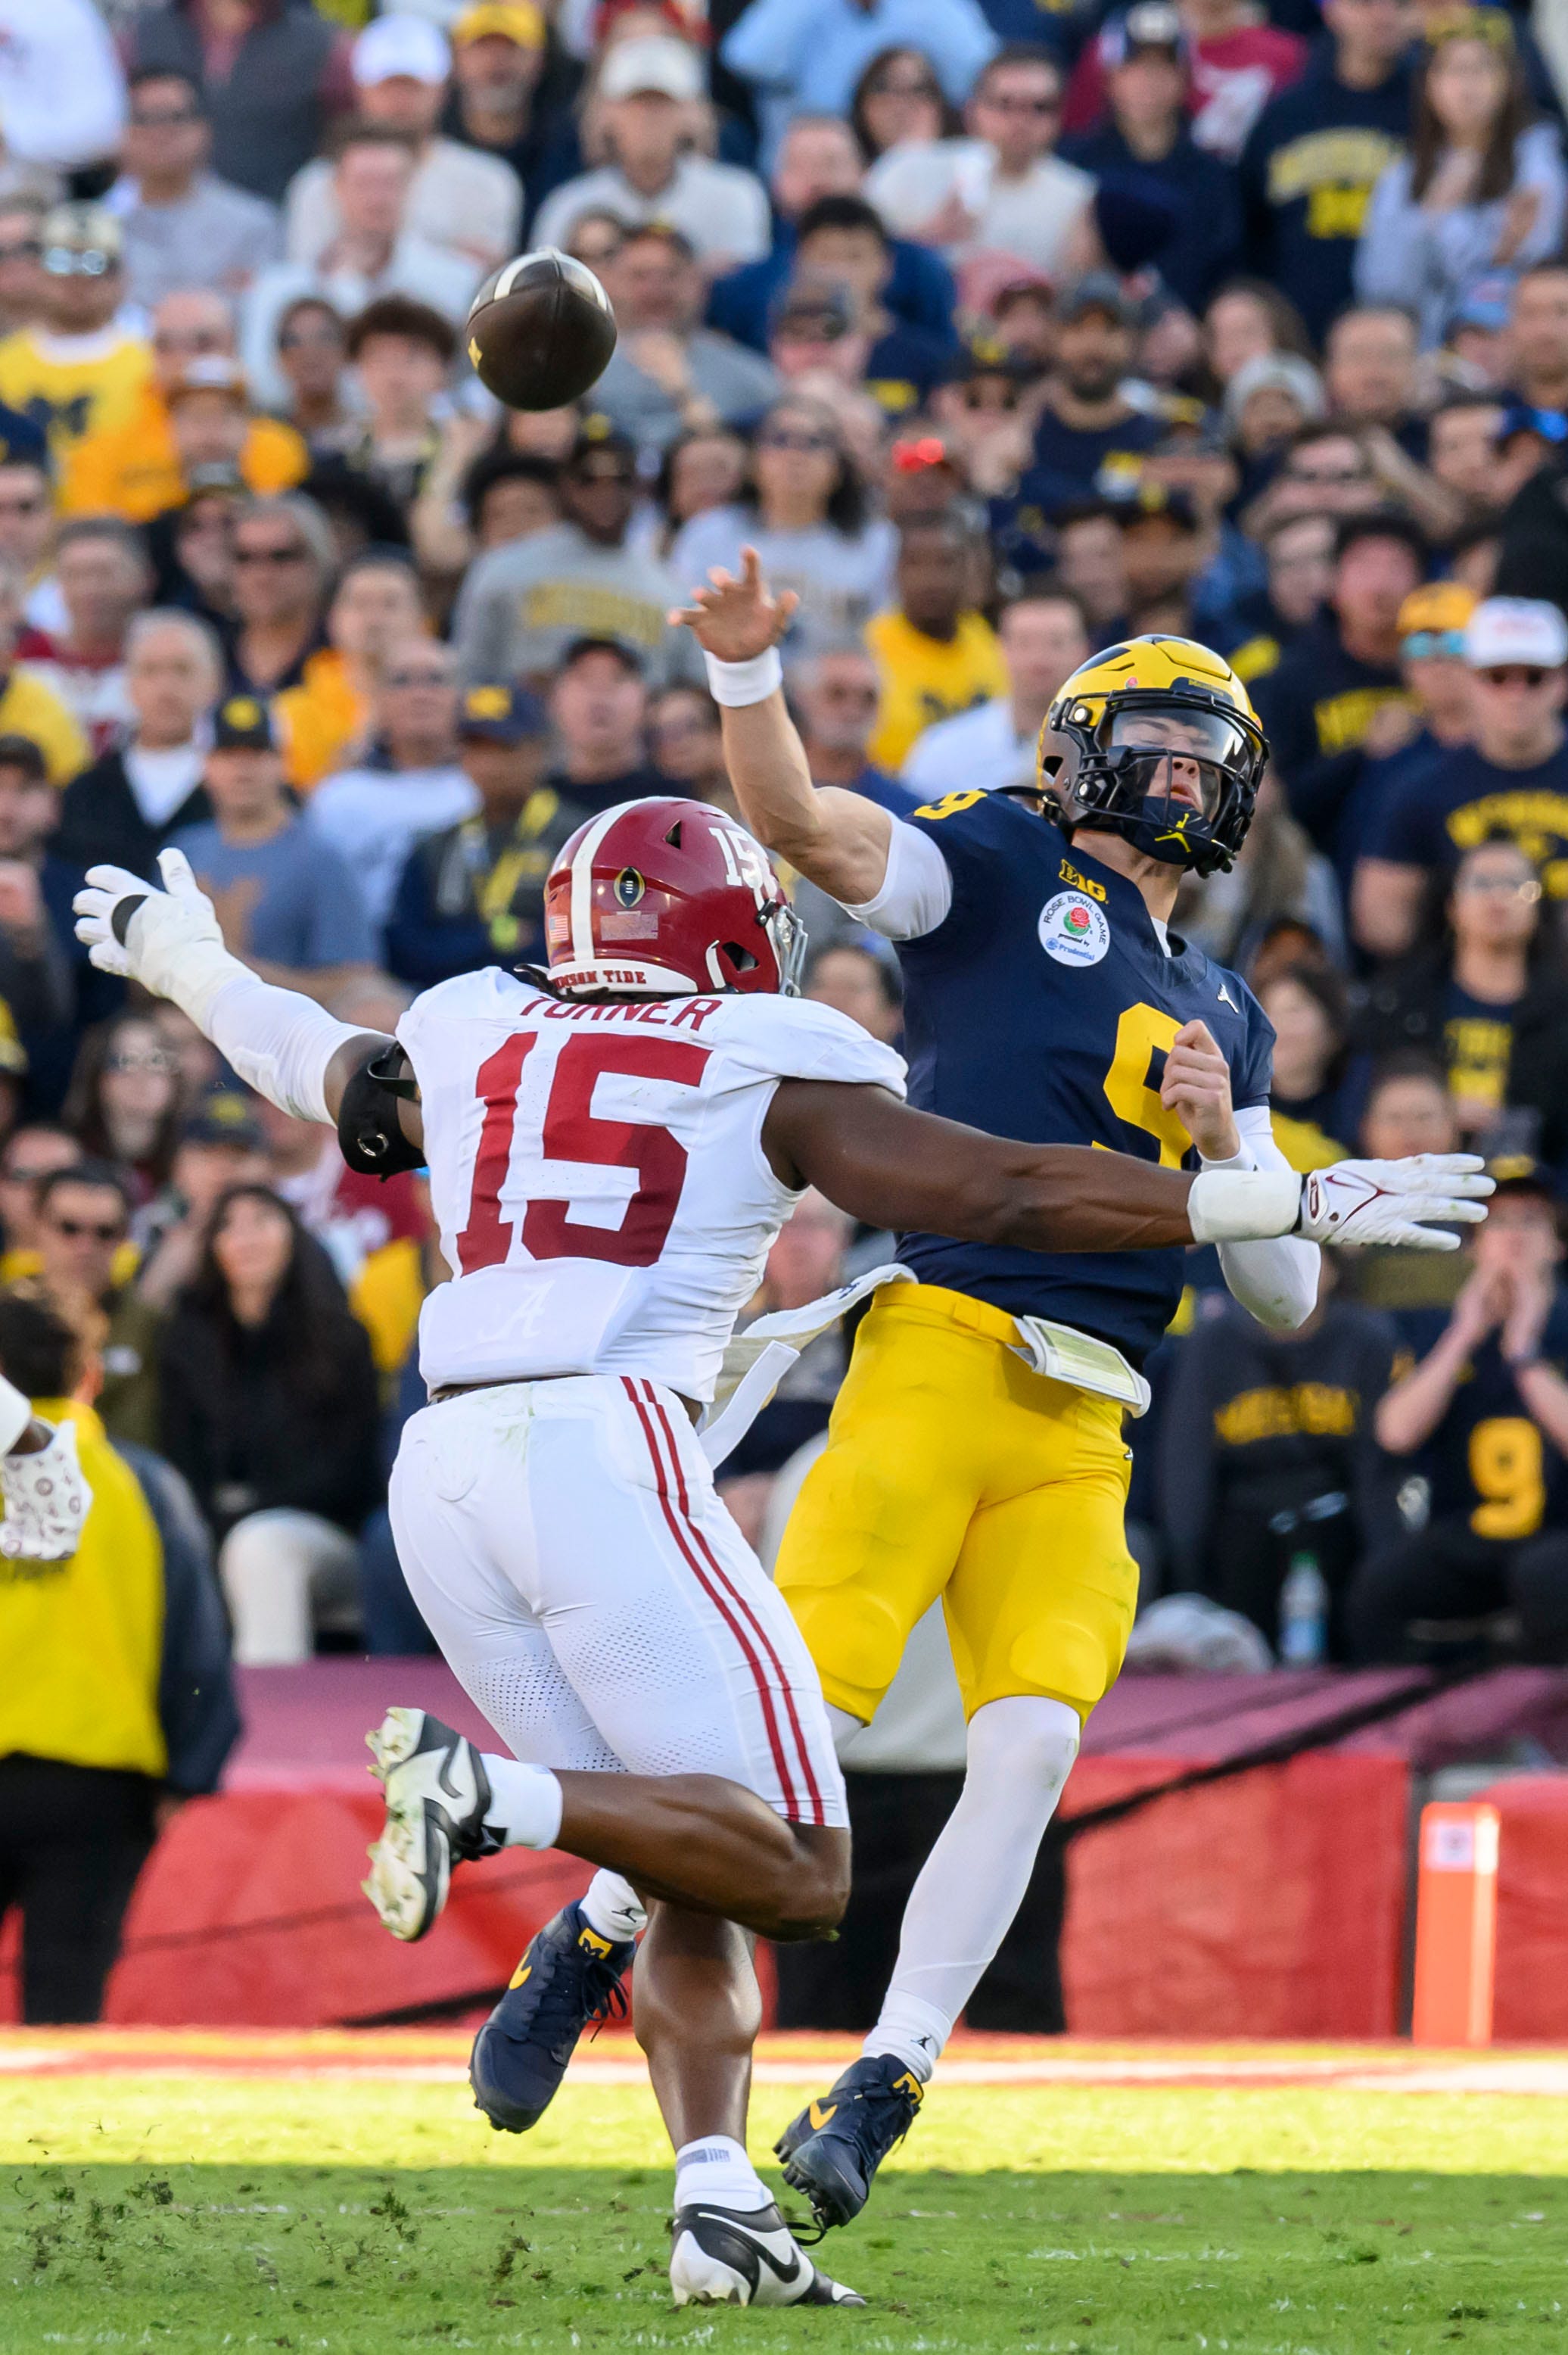 Michigan quarterback J.J. McCarthy unleashes a pass before being hit by Alabama linebacker Dallas Turner during the second quarter of the Rose Bowl, in Pasadena, California, January 1, 2024.